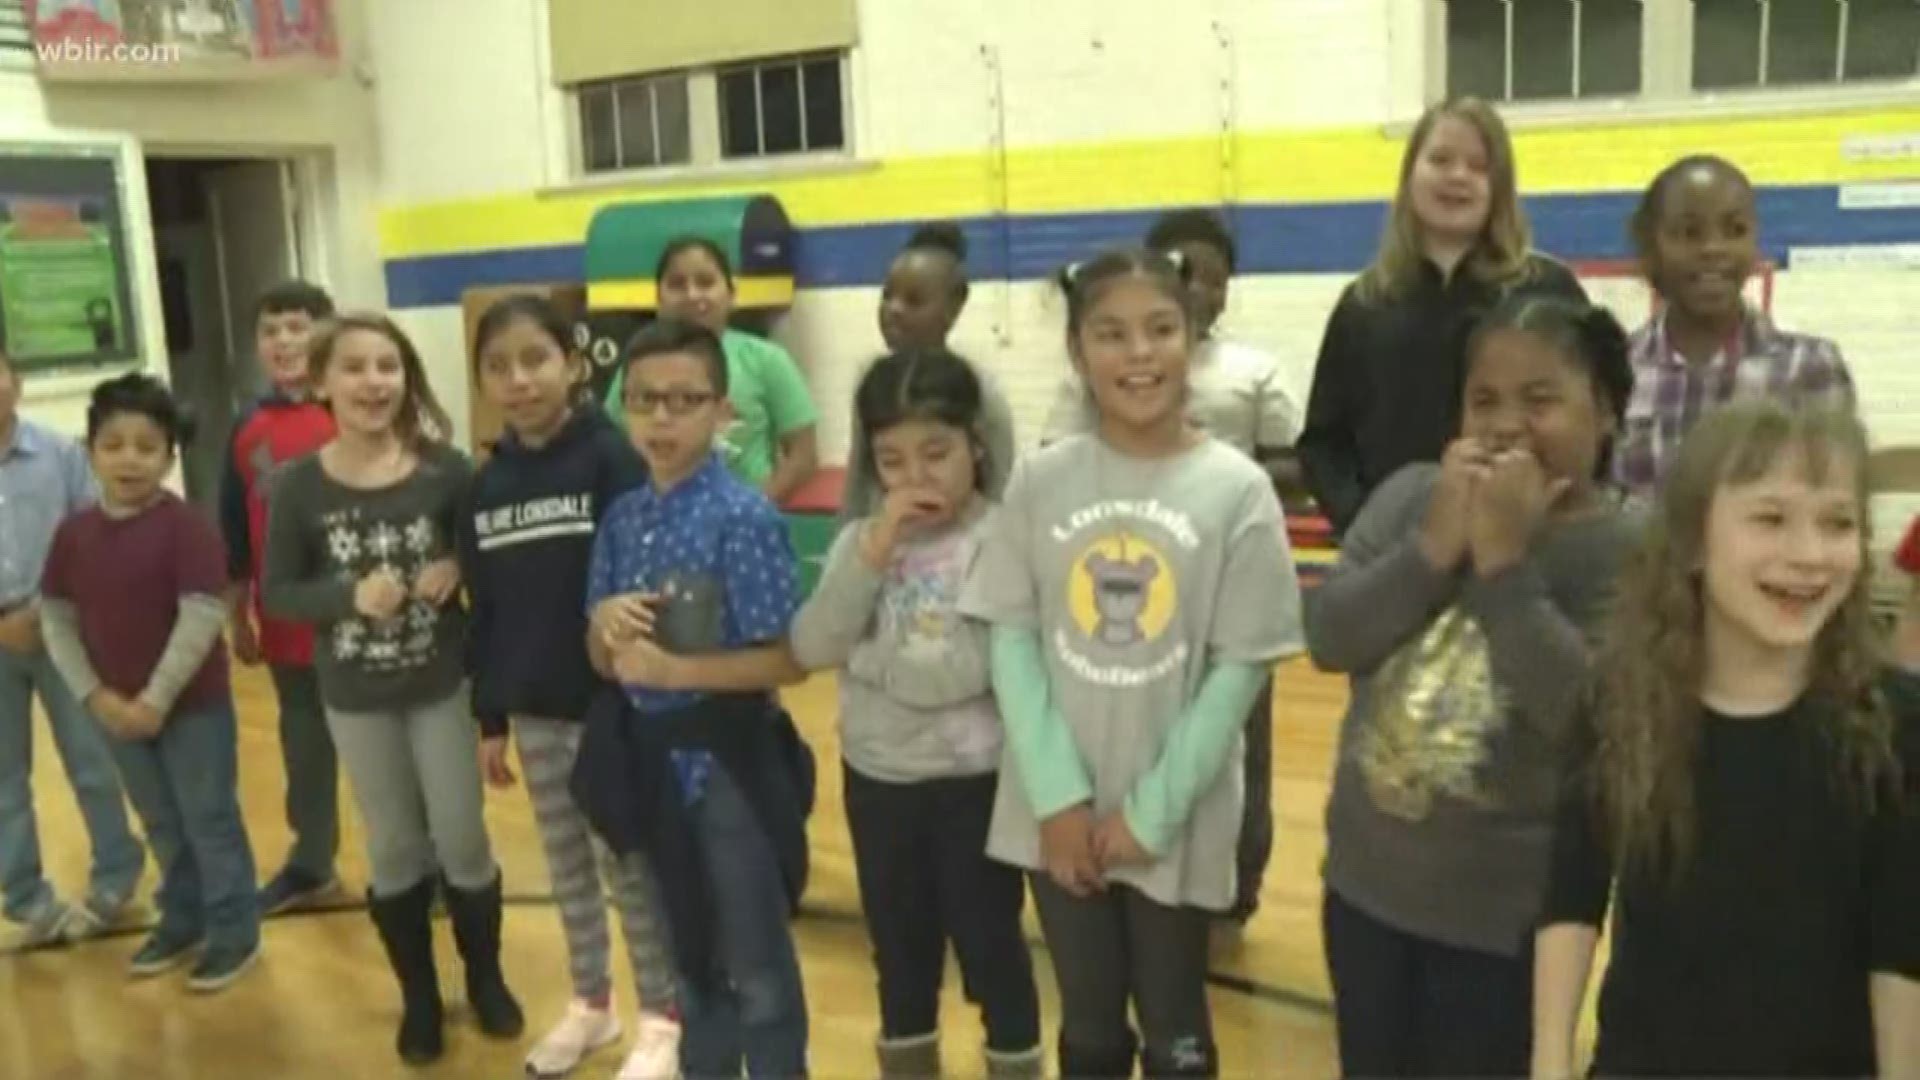 Our final #CoolSchools before the holiday break took reporter Leslie Ackerson to Lonsdale Elementary!